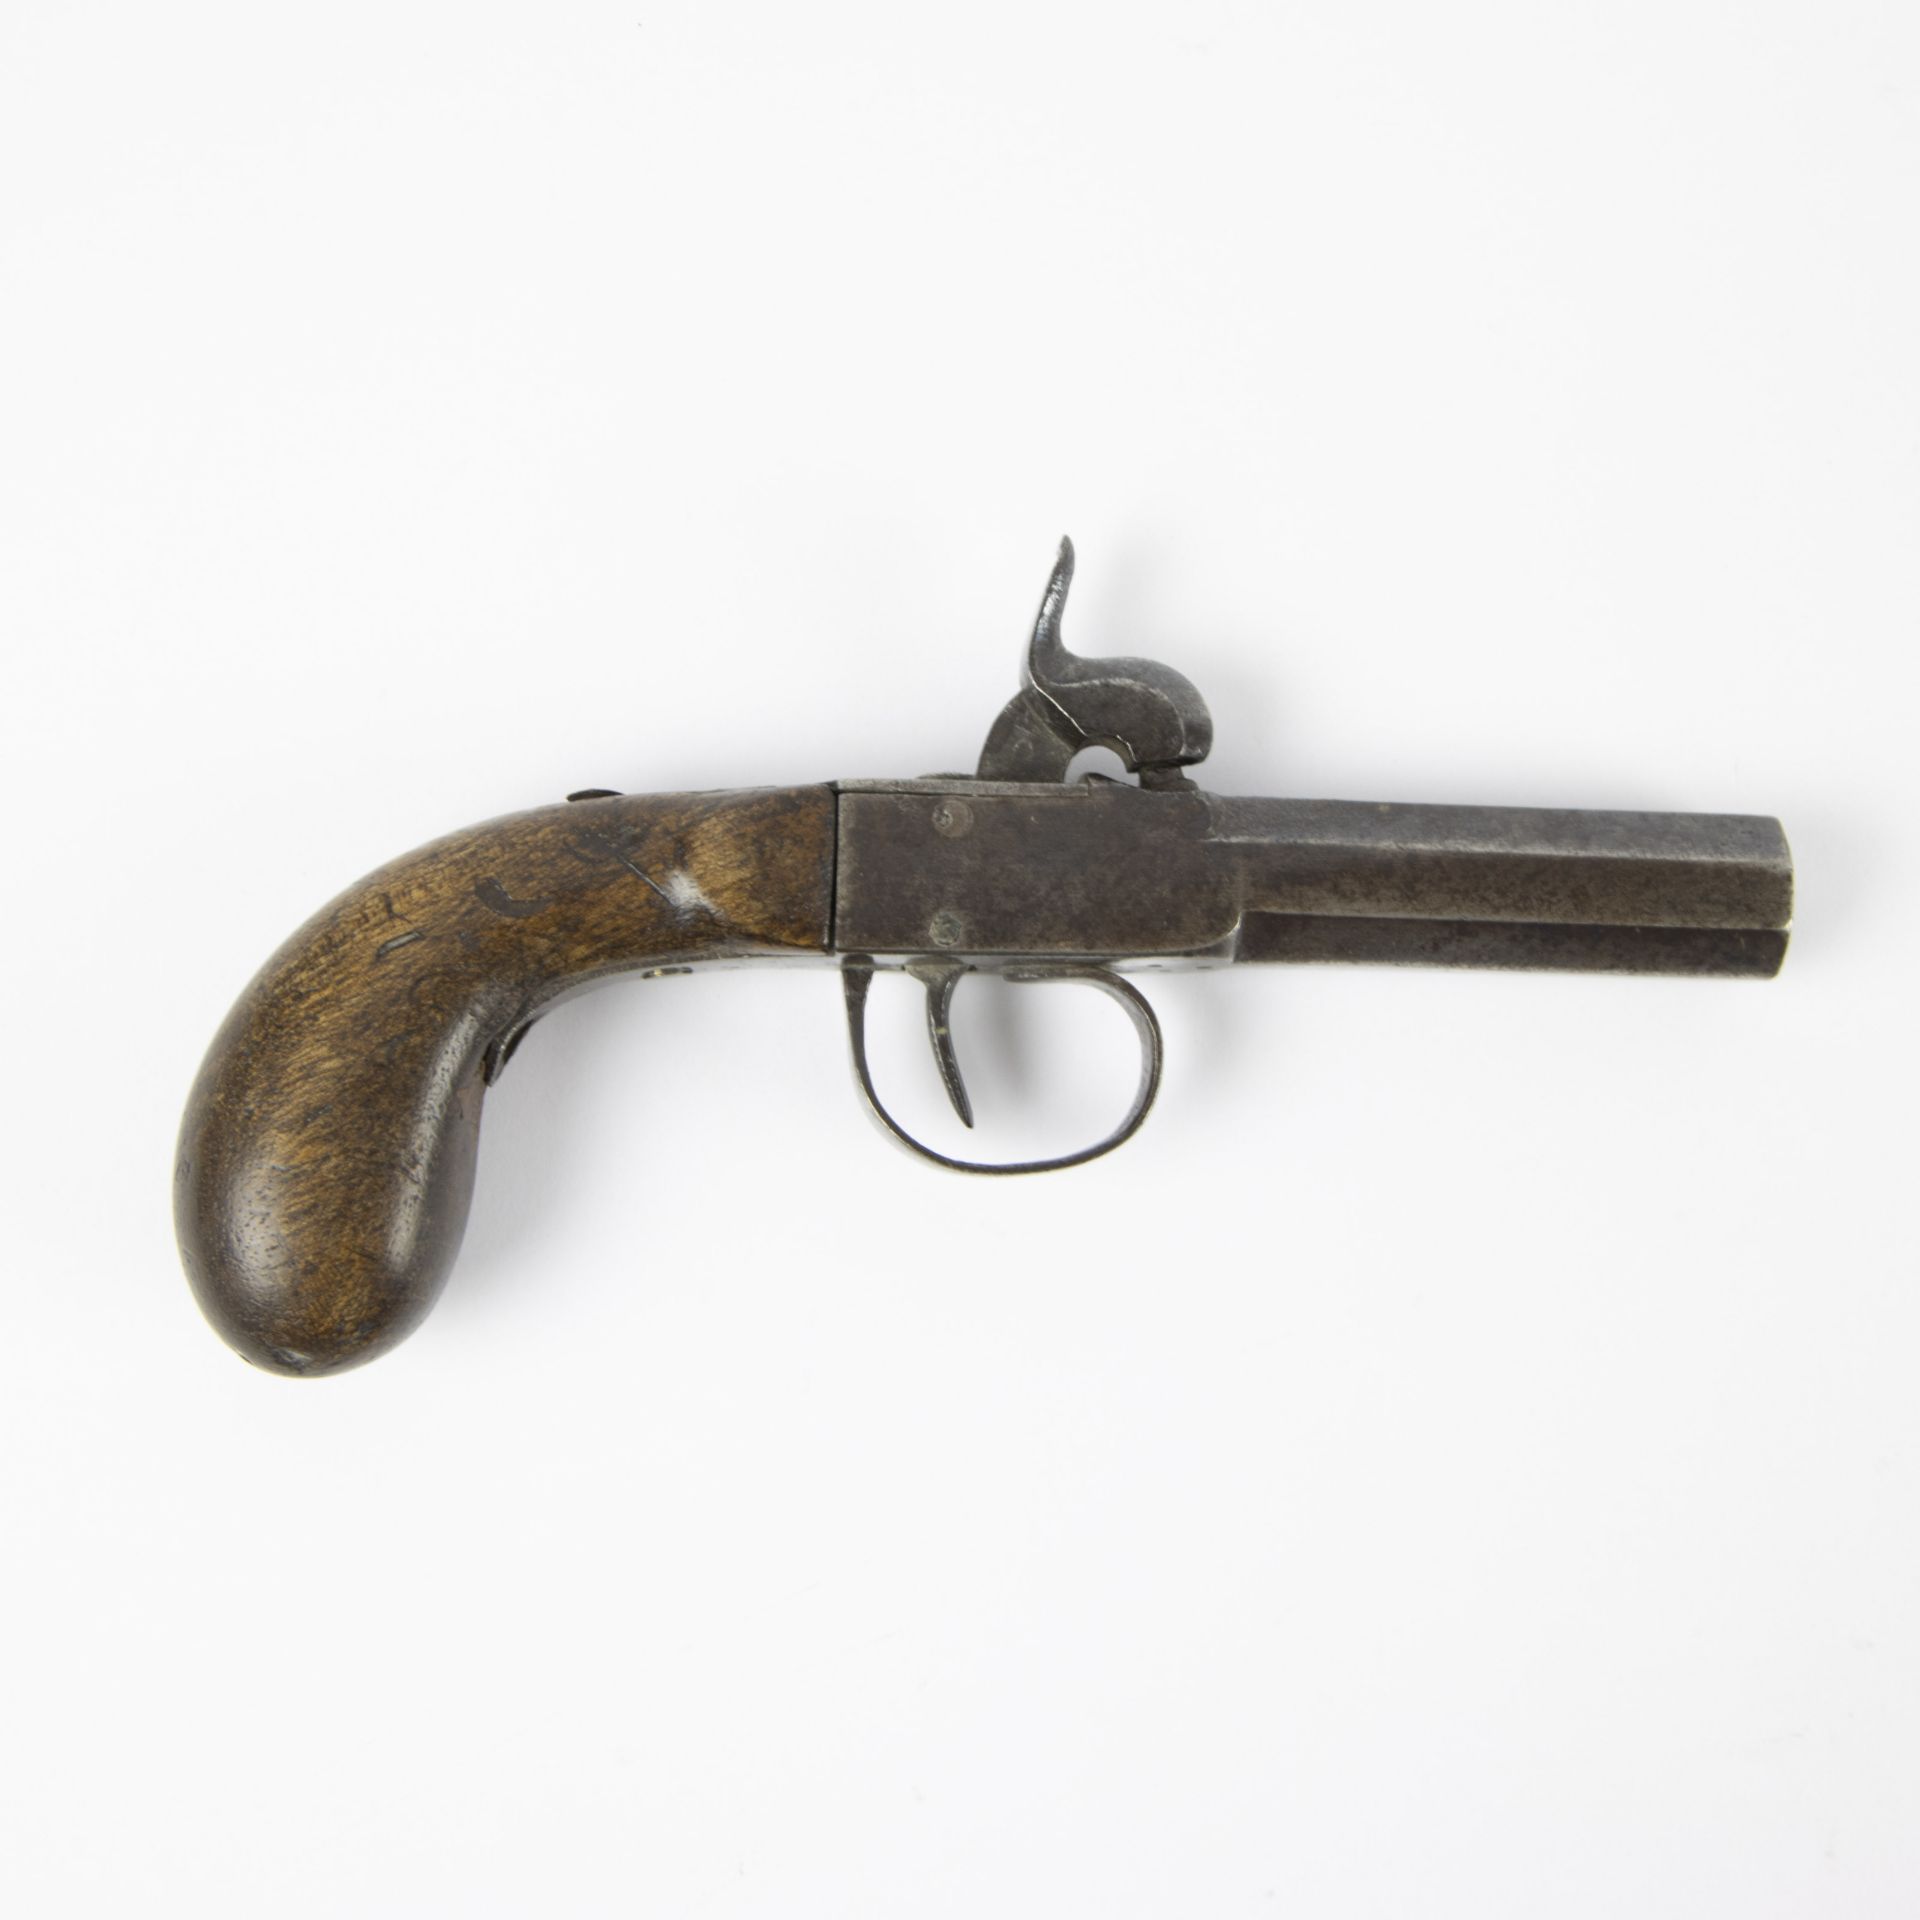 French simple percussion pocket pistol